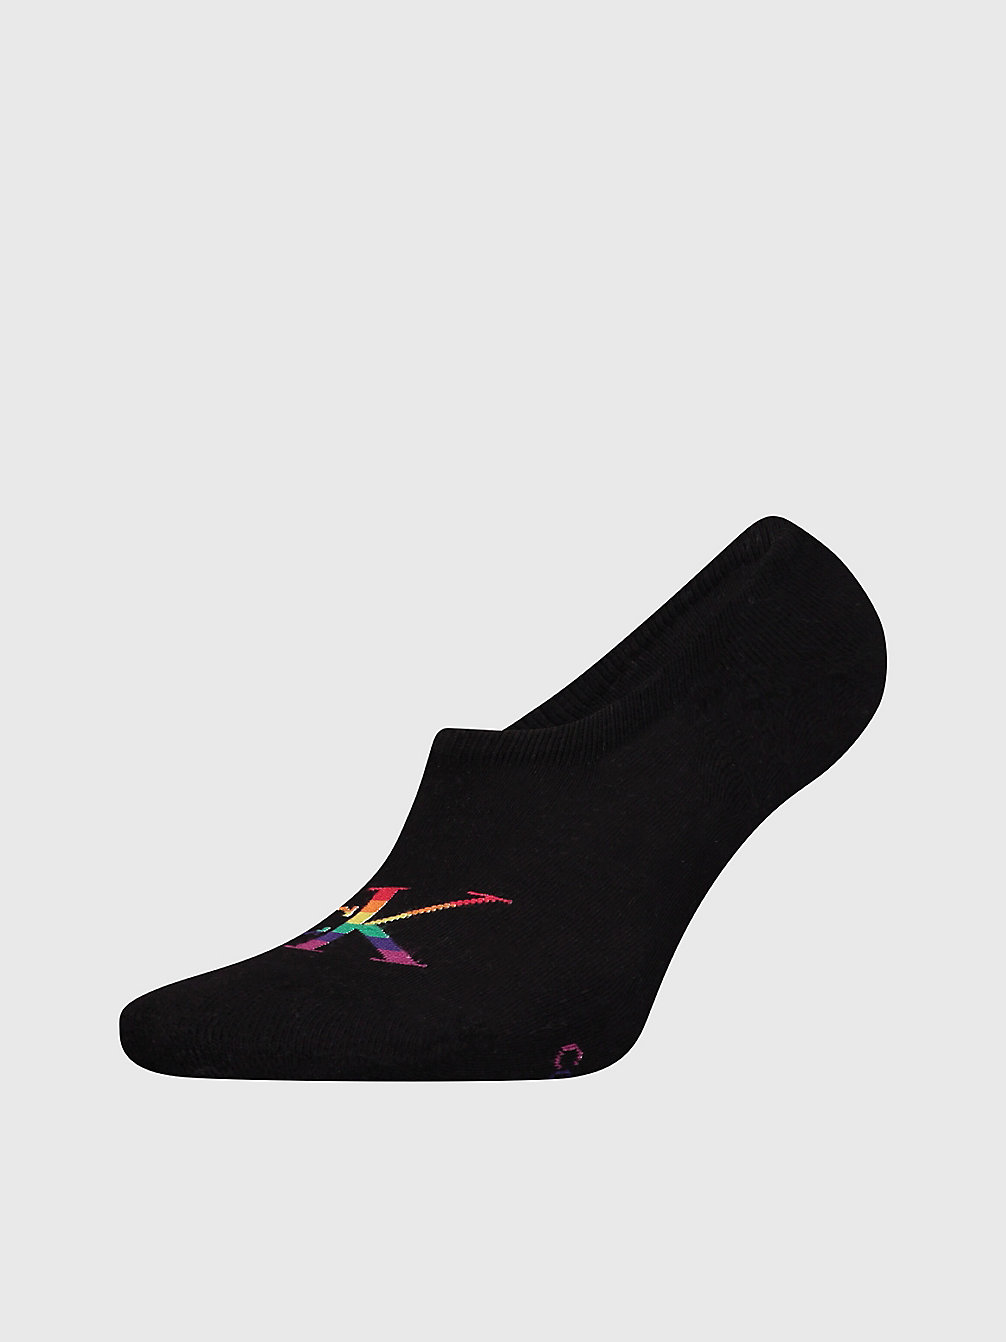 Calcetines Invisibles - Pride > BLACK > undefined mujer > Calvin Klein